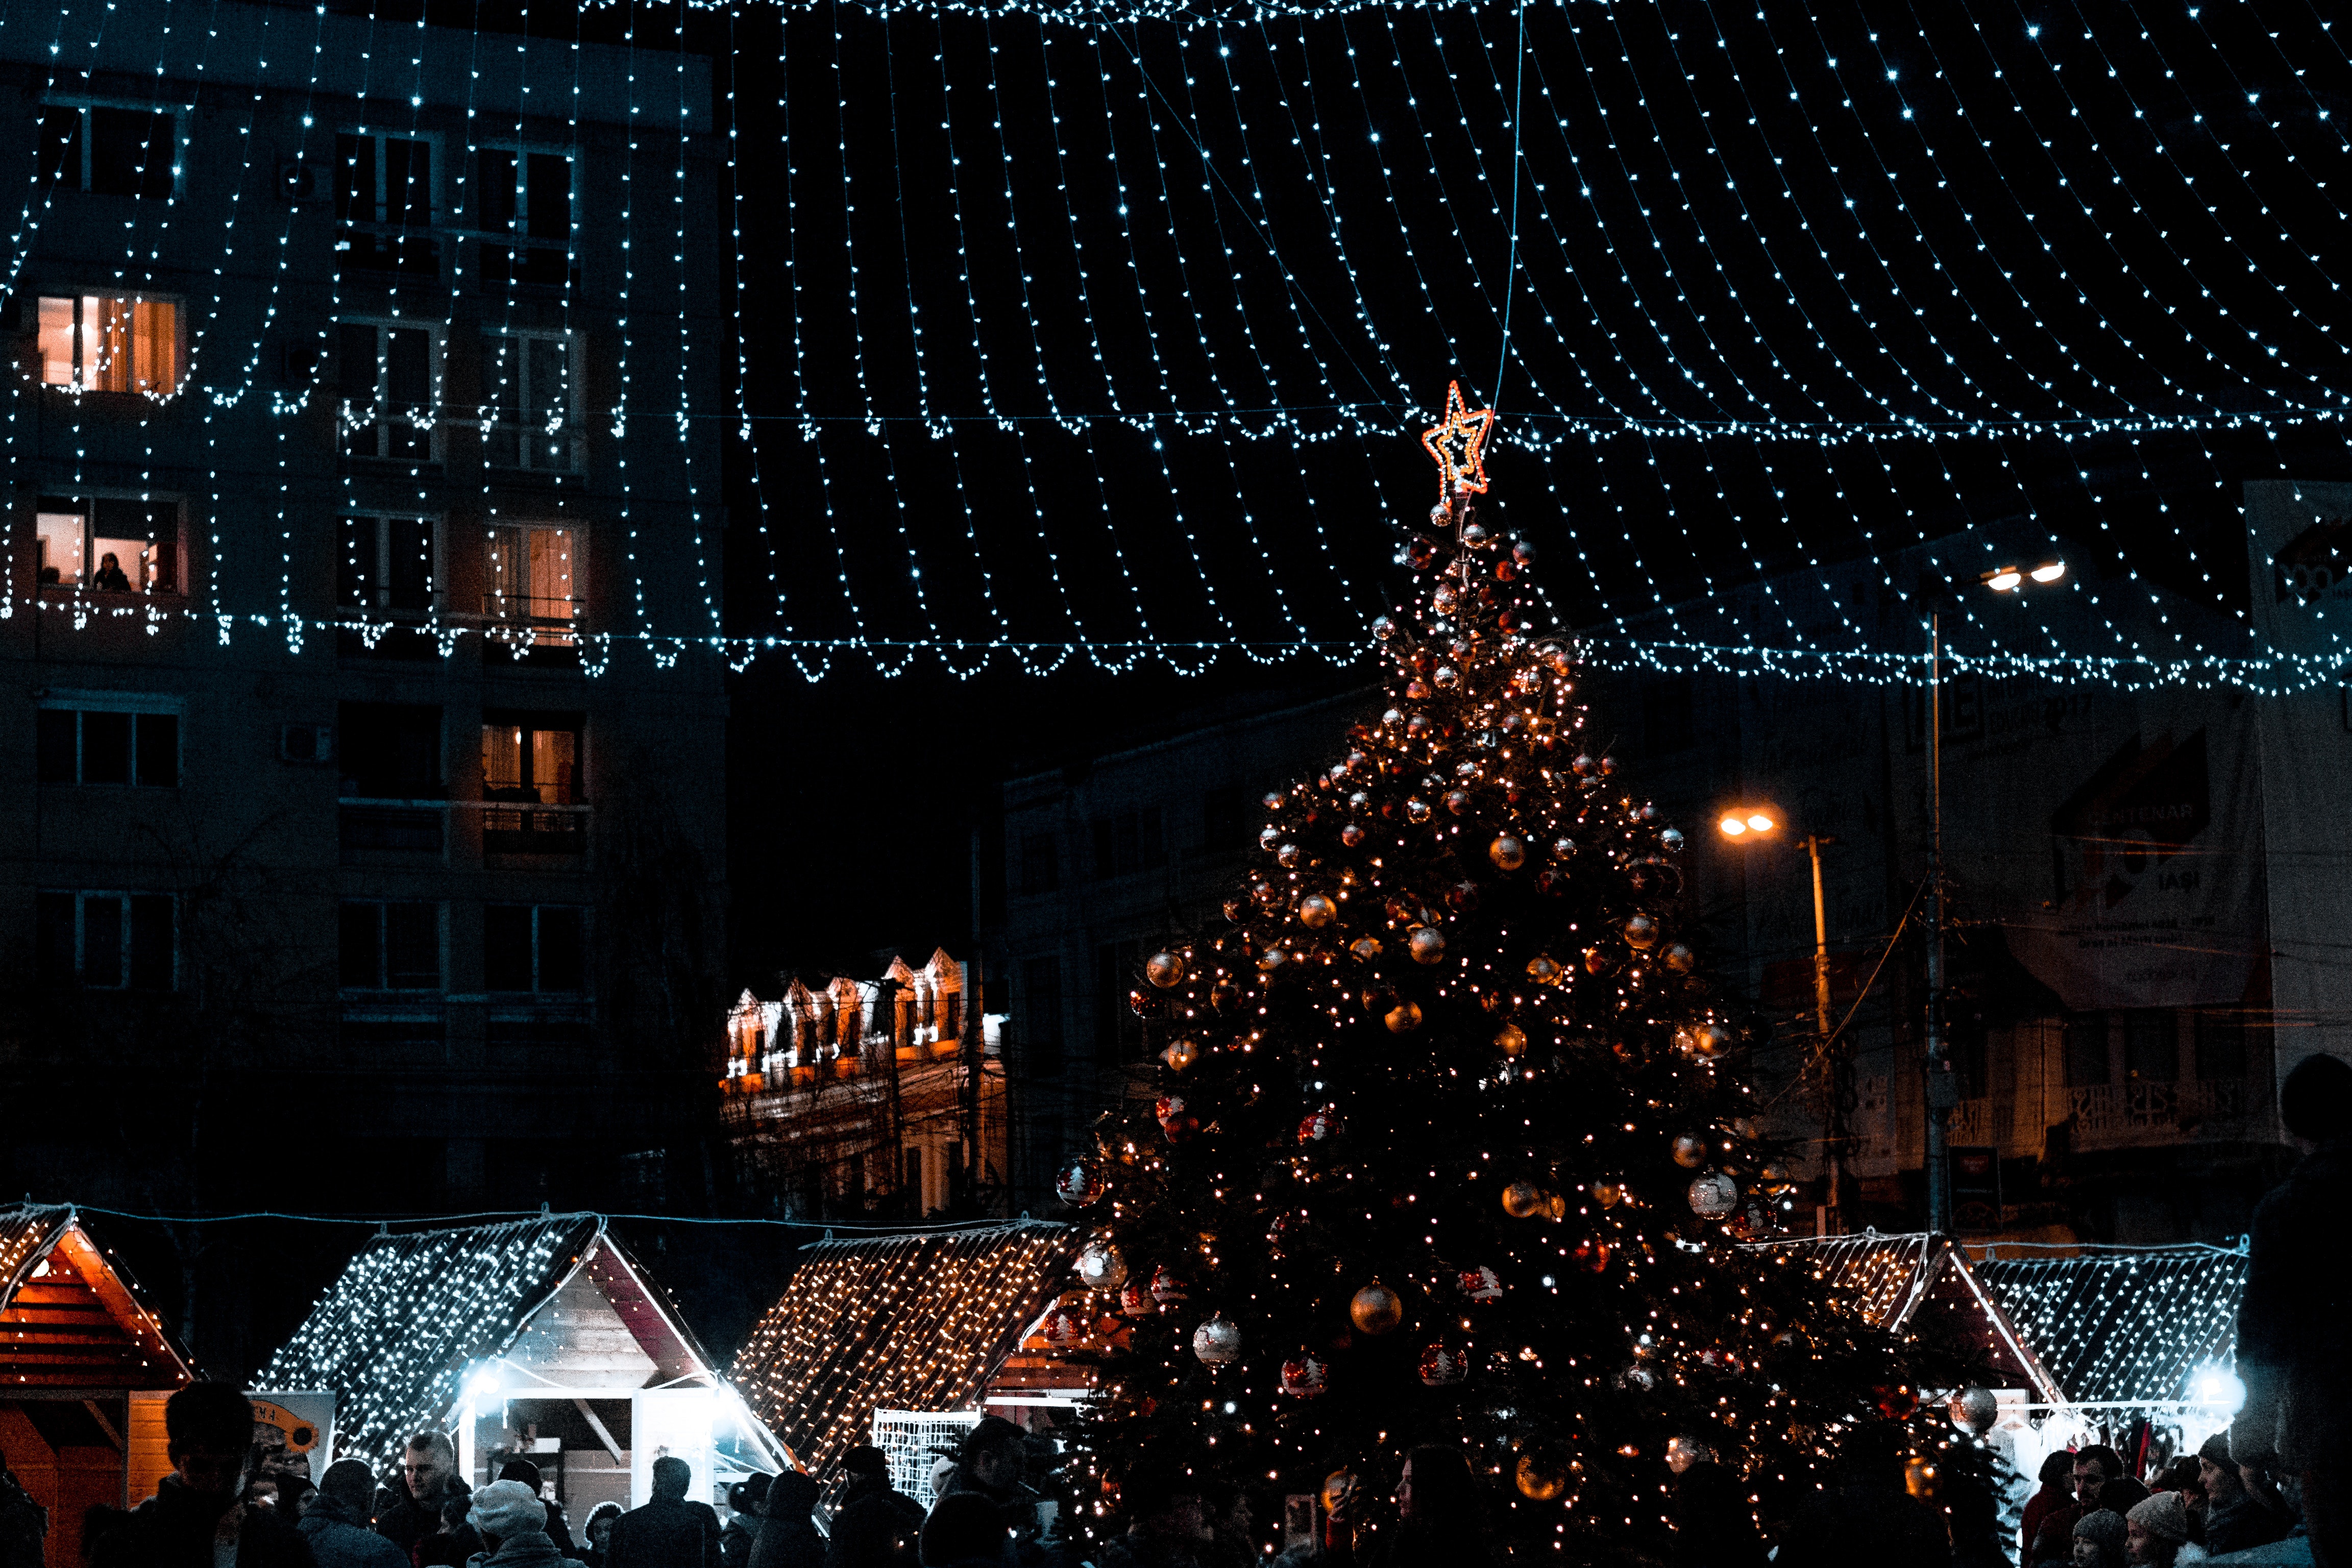 Christmas Tree With Decorations during Nighttime, Buildings, Festival, People, Night lights, HQ Photo